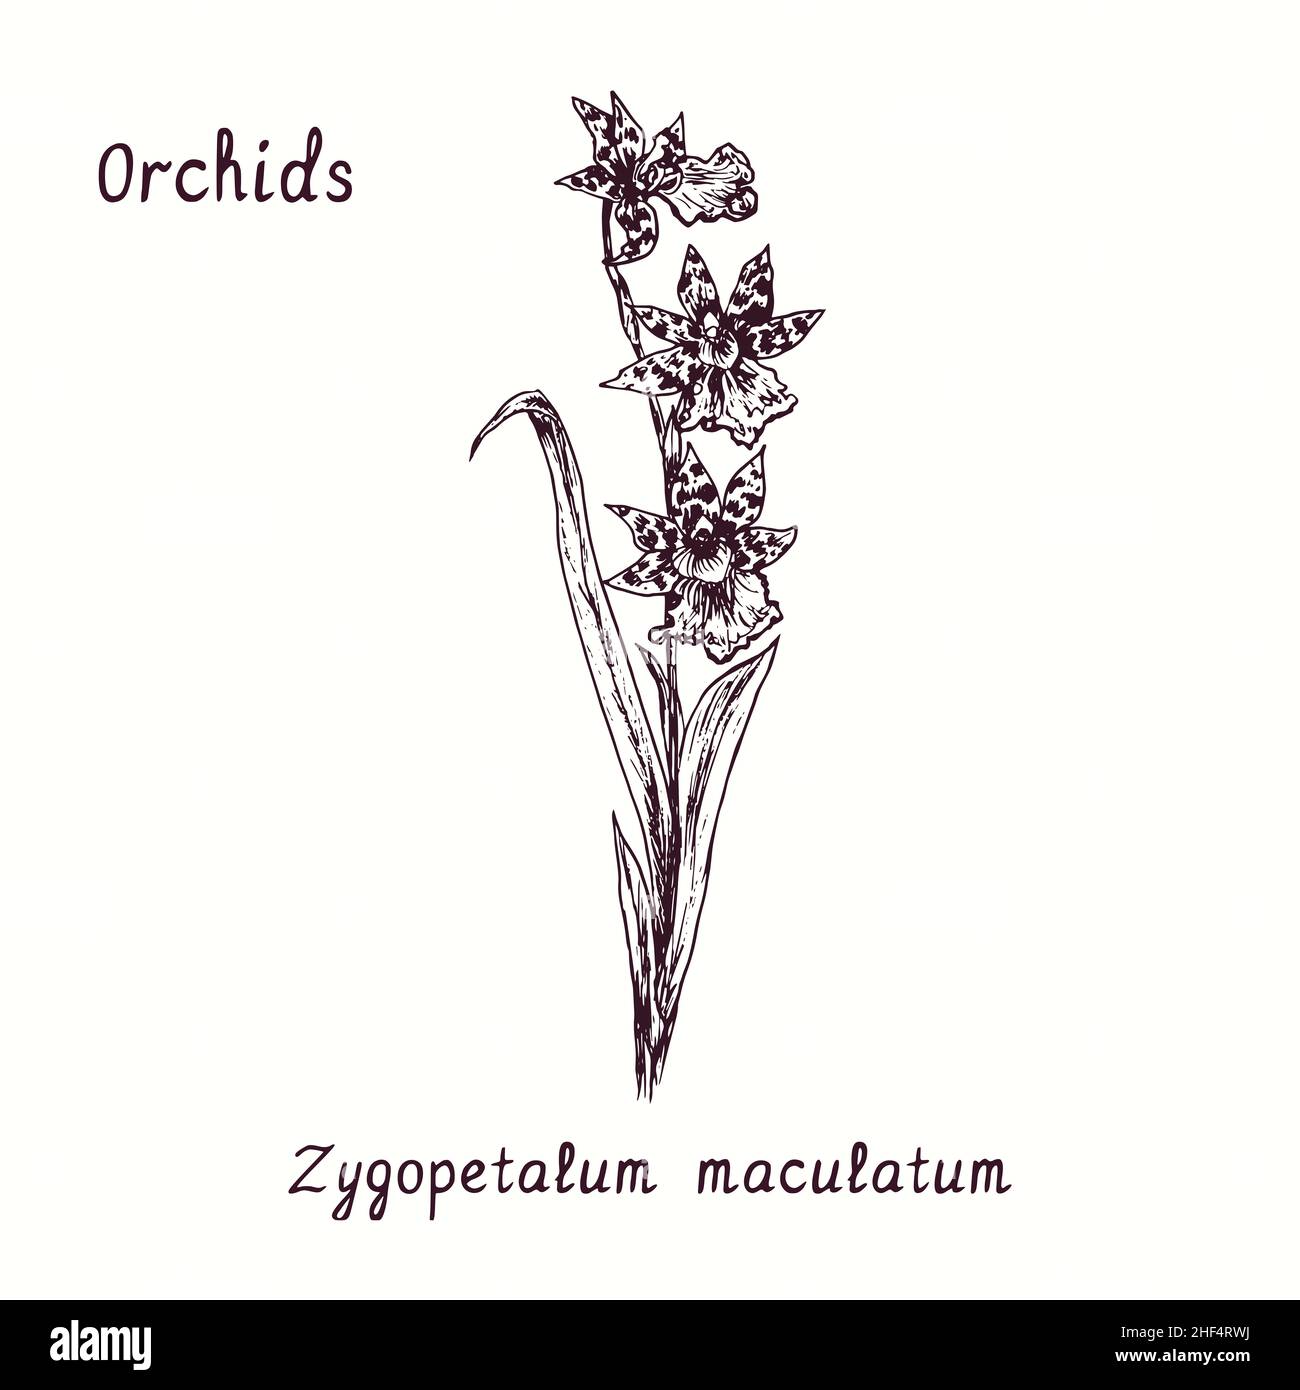 Zygopetalum maculatum orchids flower collection. Ink black and white doodle drawing in woodcut style with inscription. Stock Photo